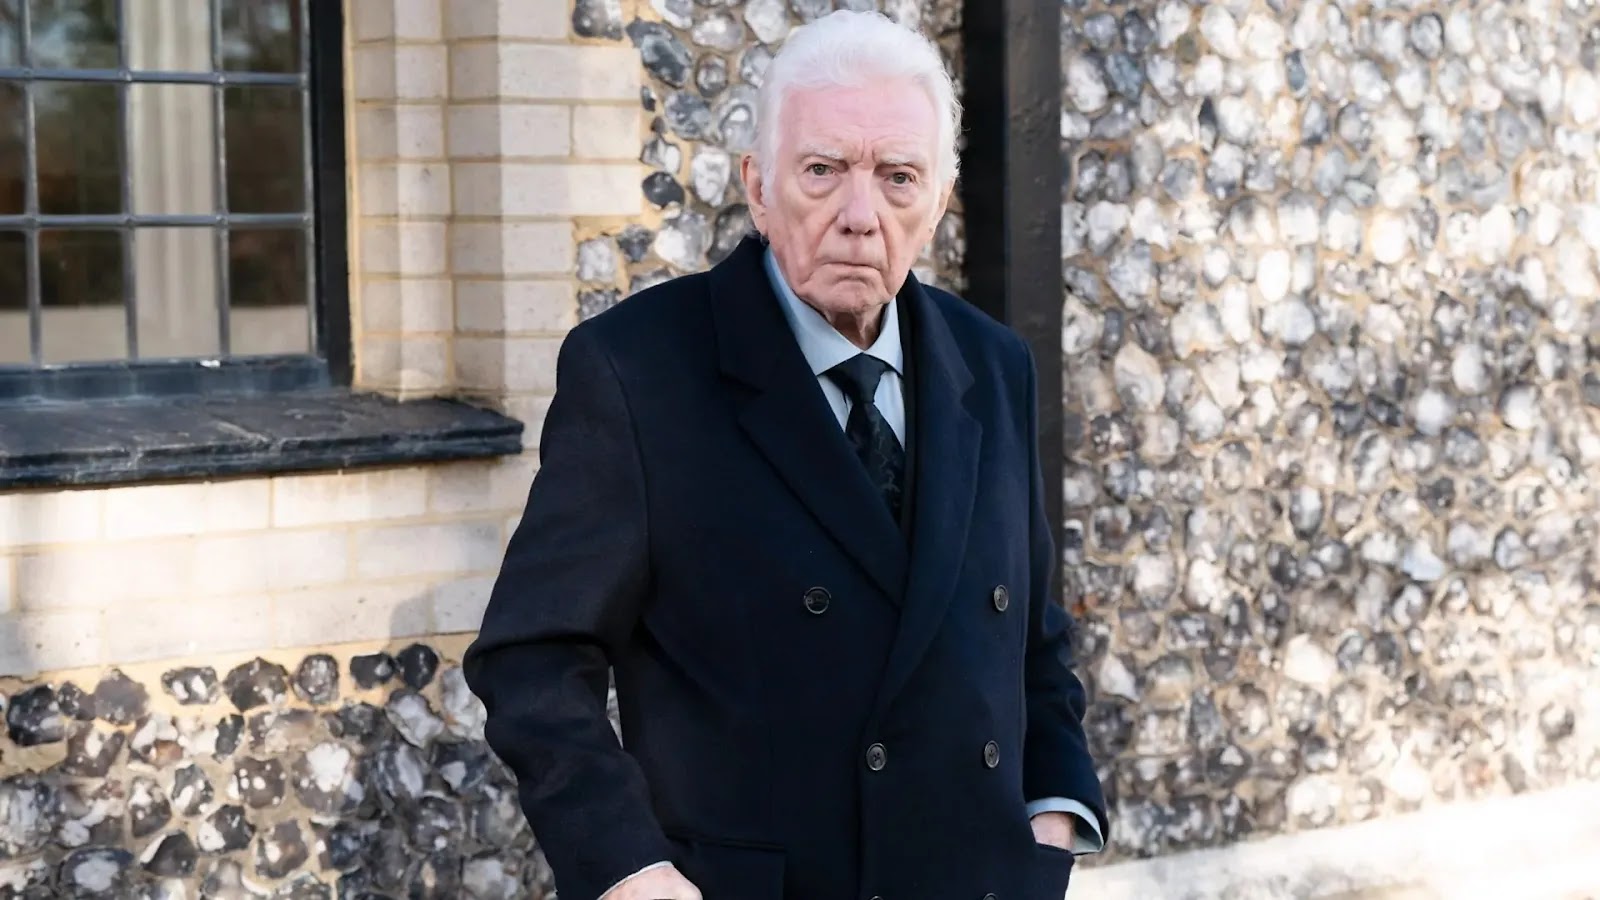 Alan Ford Joins EastEnders as Billy Mitchells Estranged Father Stevie